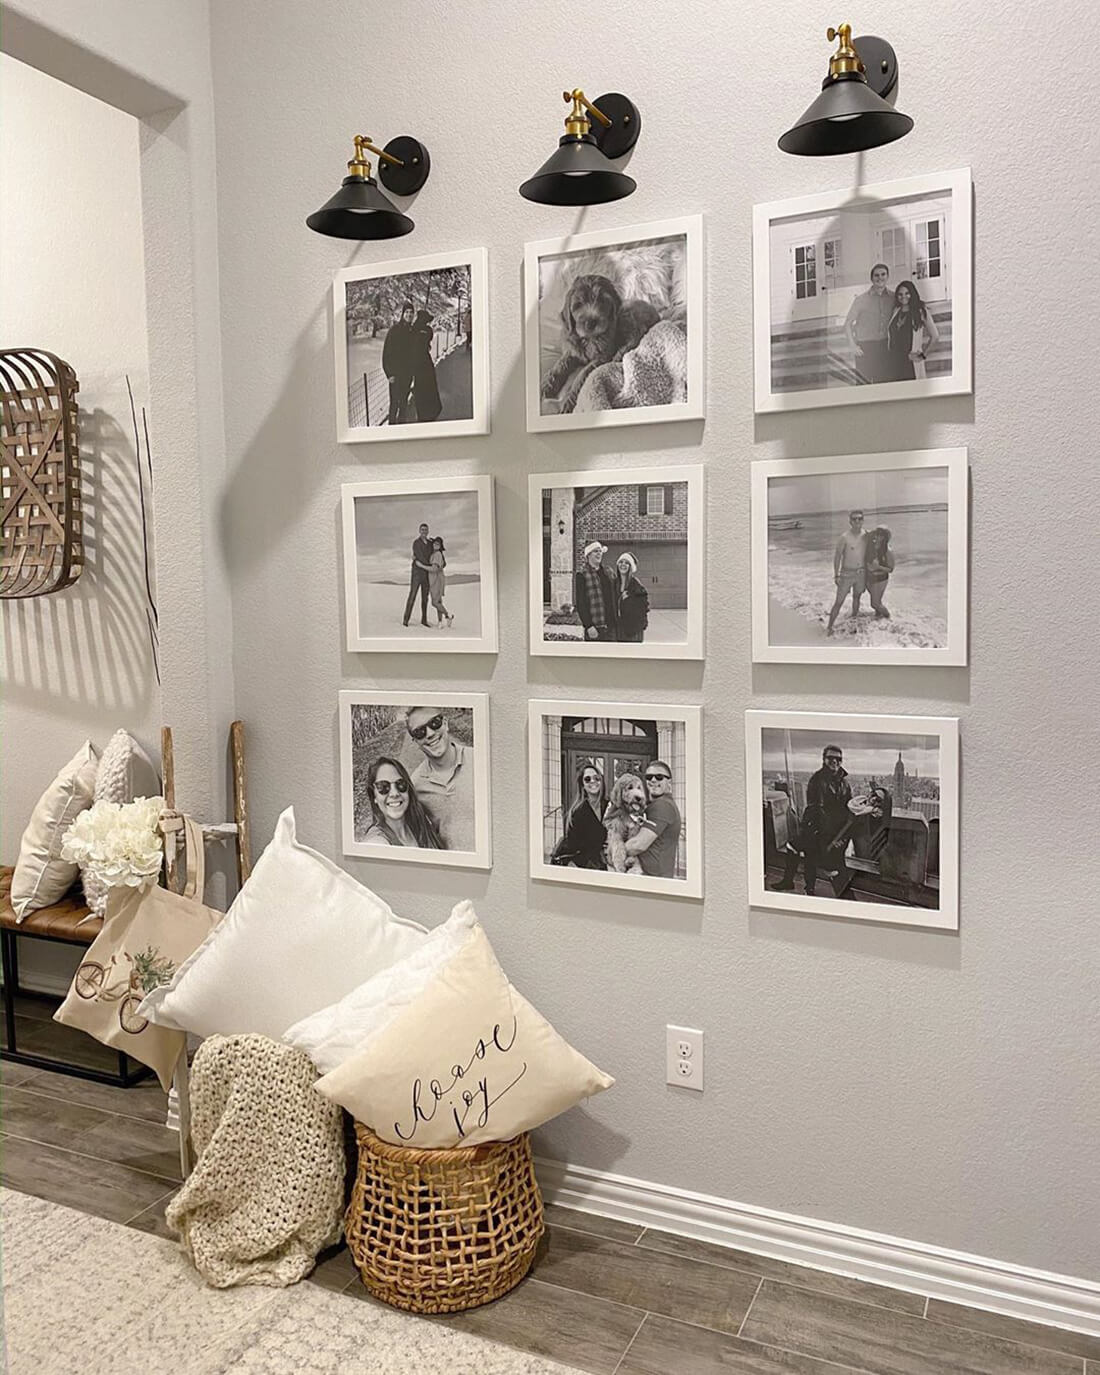 How to Create a Flawless Photo Gallery Wall in 5 Easy Steps • Little Gold Pixel #familyphotos #gallerywall #gallerywallideas

Photo © Andrea Vowels / My Blessed Home